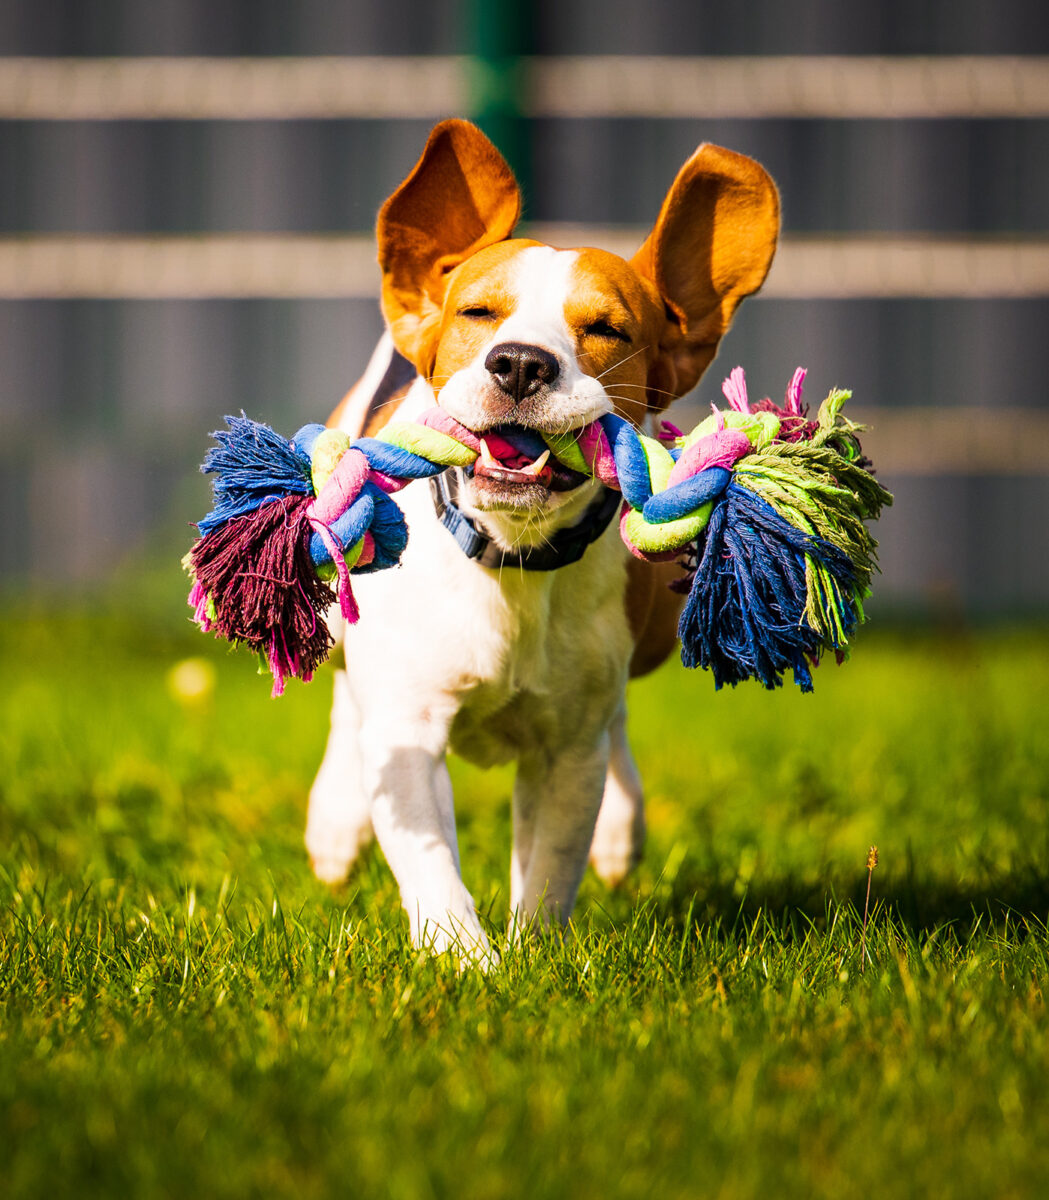 A dog running across a field with a toy in its mouth